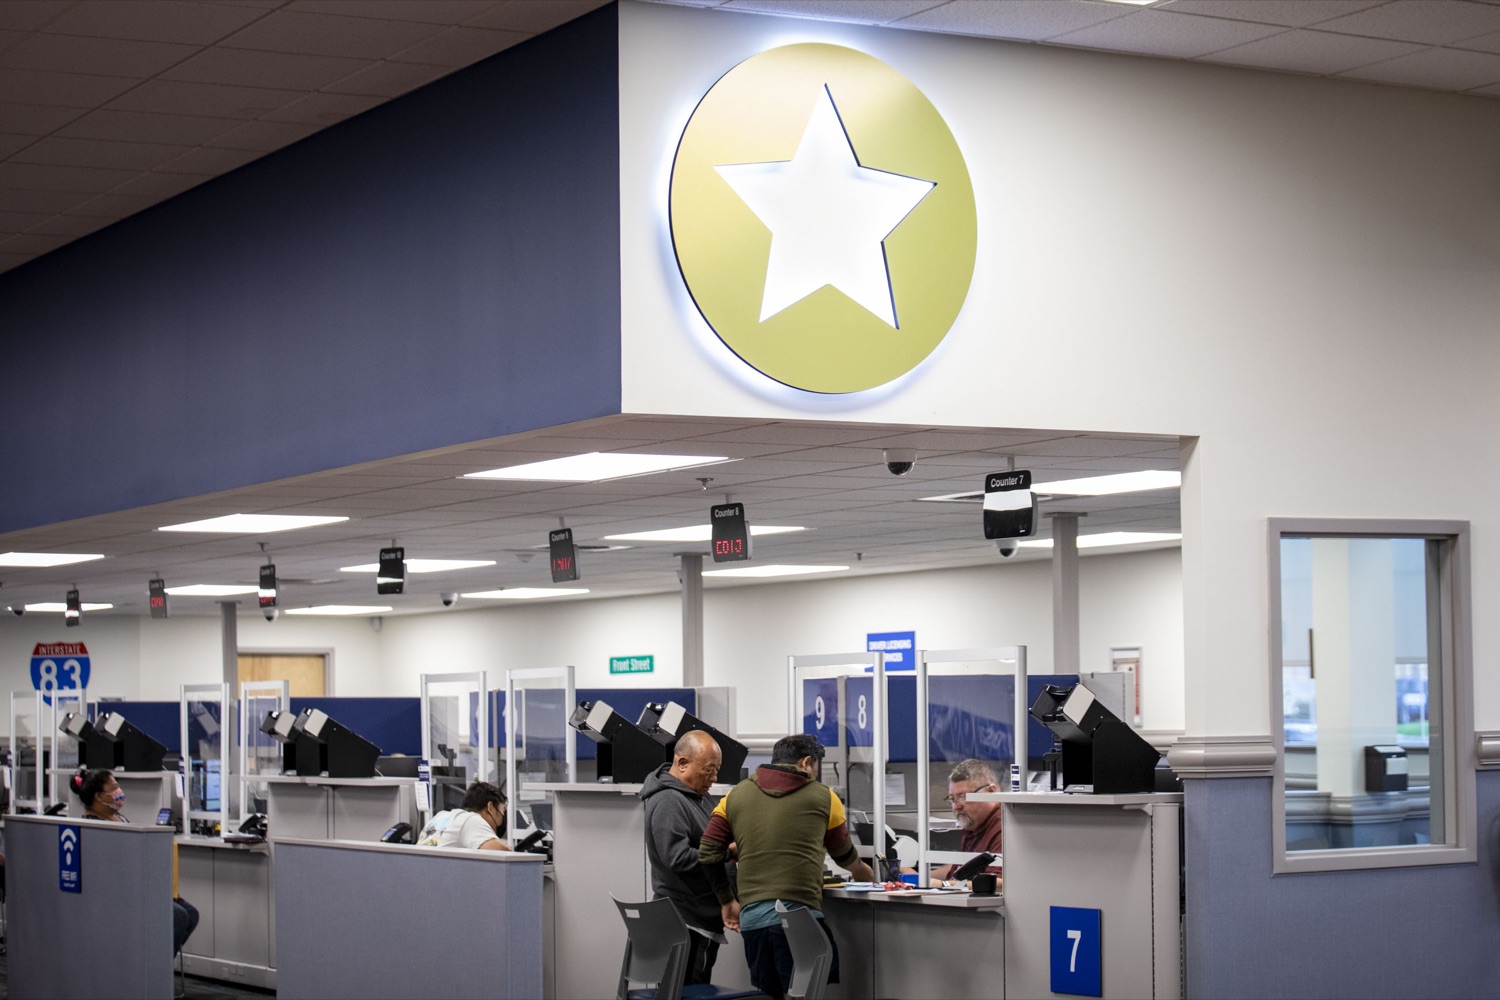 The Summerdale Driver License Center in Enola began piloting new products on September 12, 2022 and, since then, another 15 locations have started issuing the new products as part of ongoing security enhancements, in Enola, PA on September 22, 2022.<br><a href="https://filesource.amperwave.net/commonwealthofpa/photo/22223_dot_security_cz_15.jpg" target="_blank">⇣ Download Photo</a>